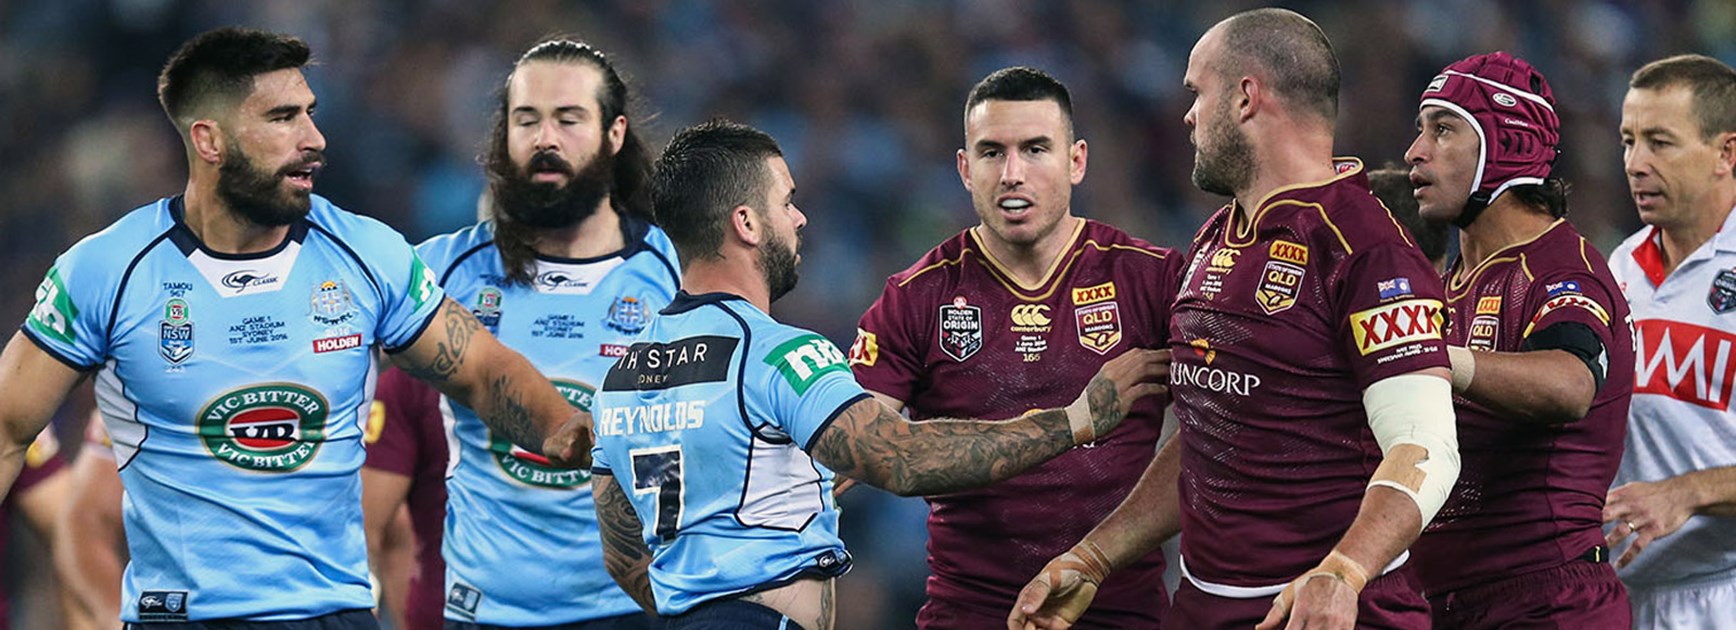 NSW and Queensland players come together during the opening game of the Origin series.